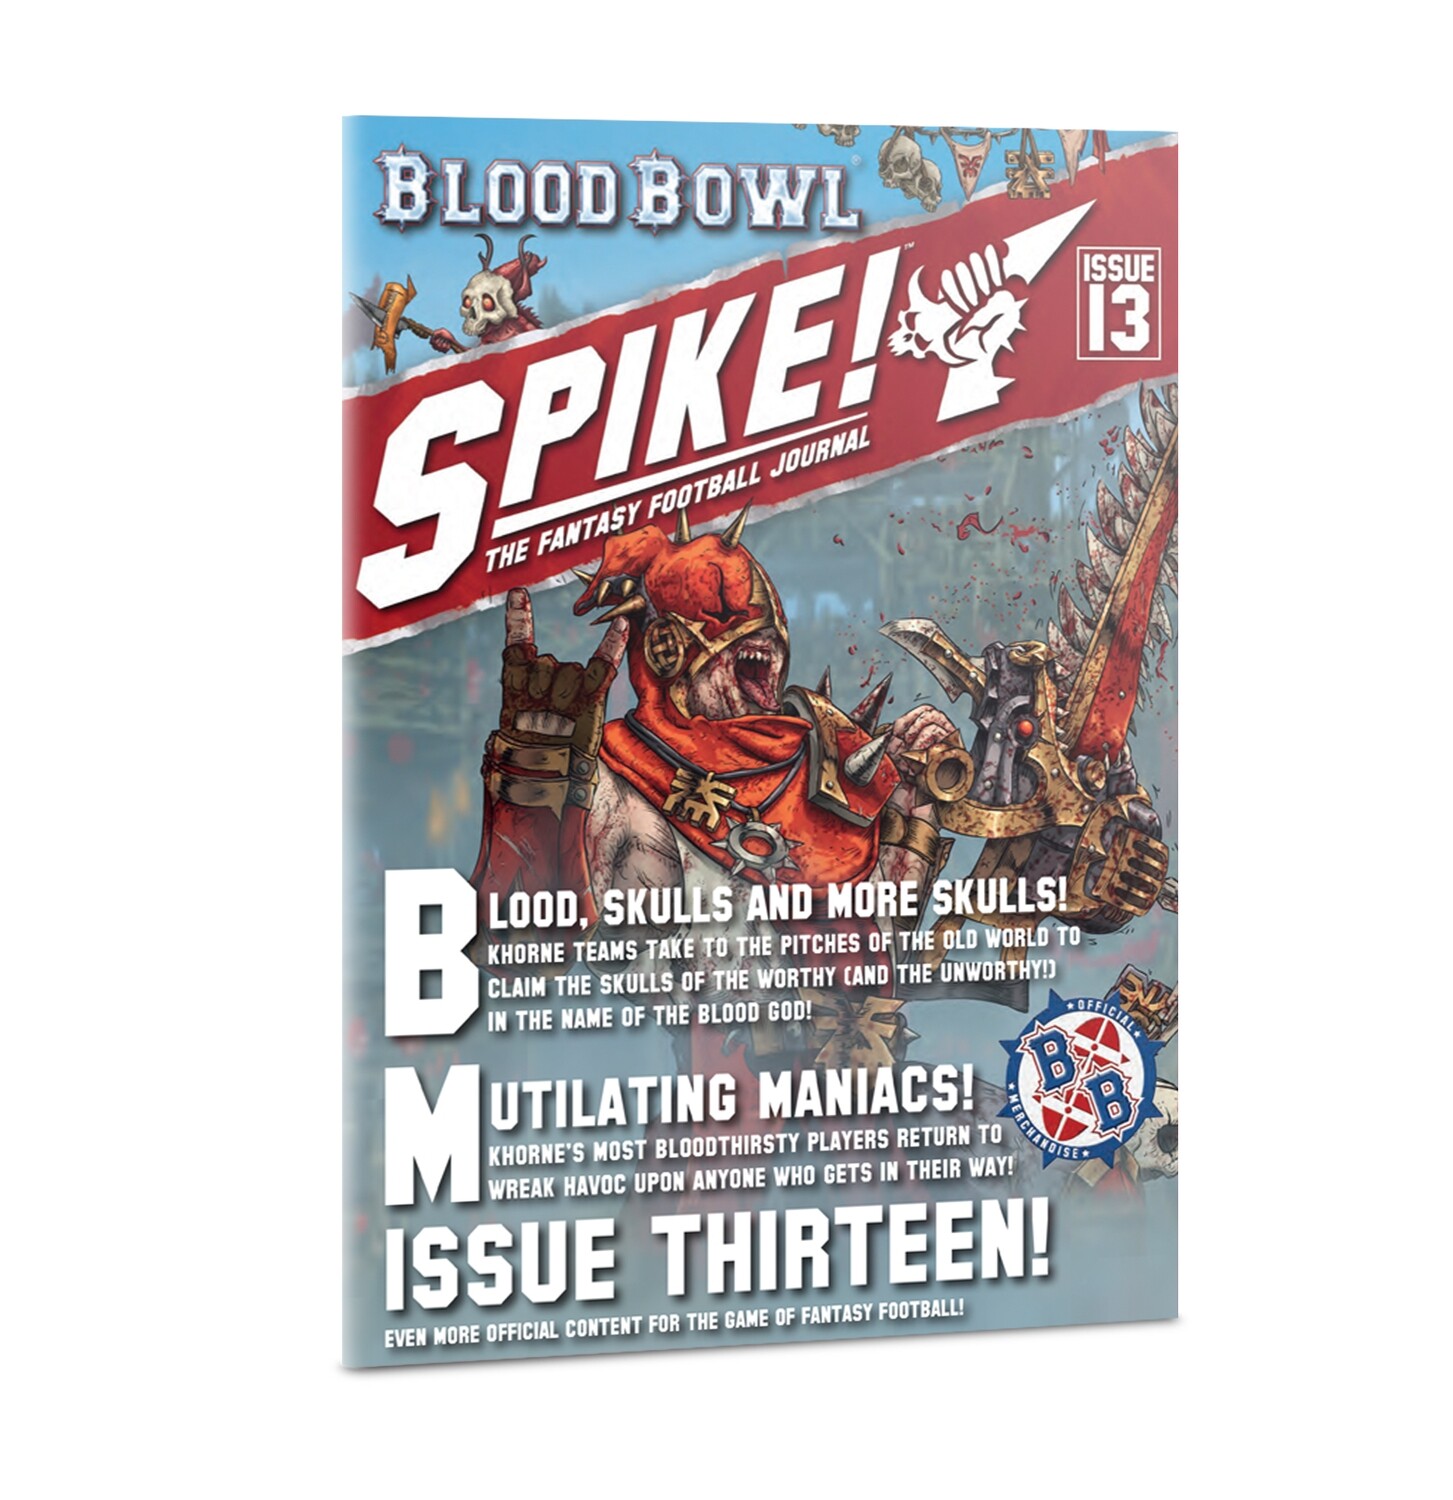 Blood Bowl - Spike! Journal Issue 13 (ENG)